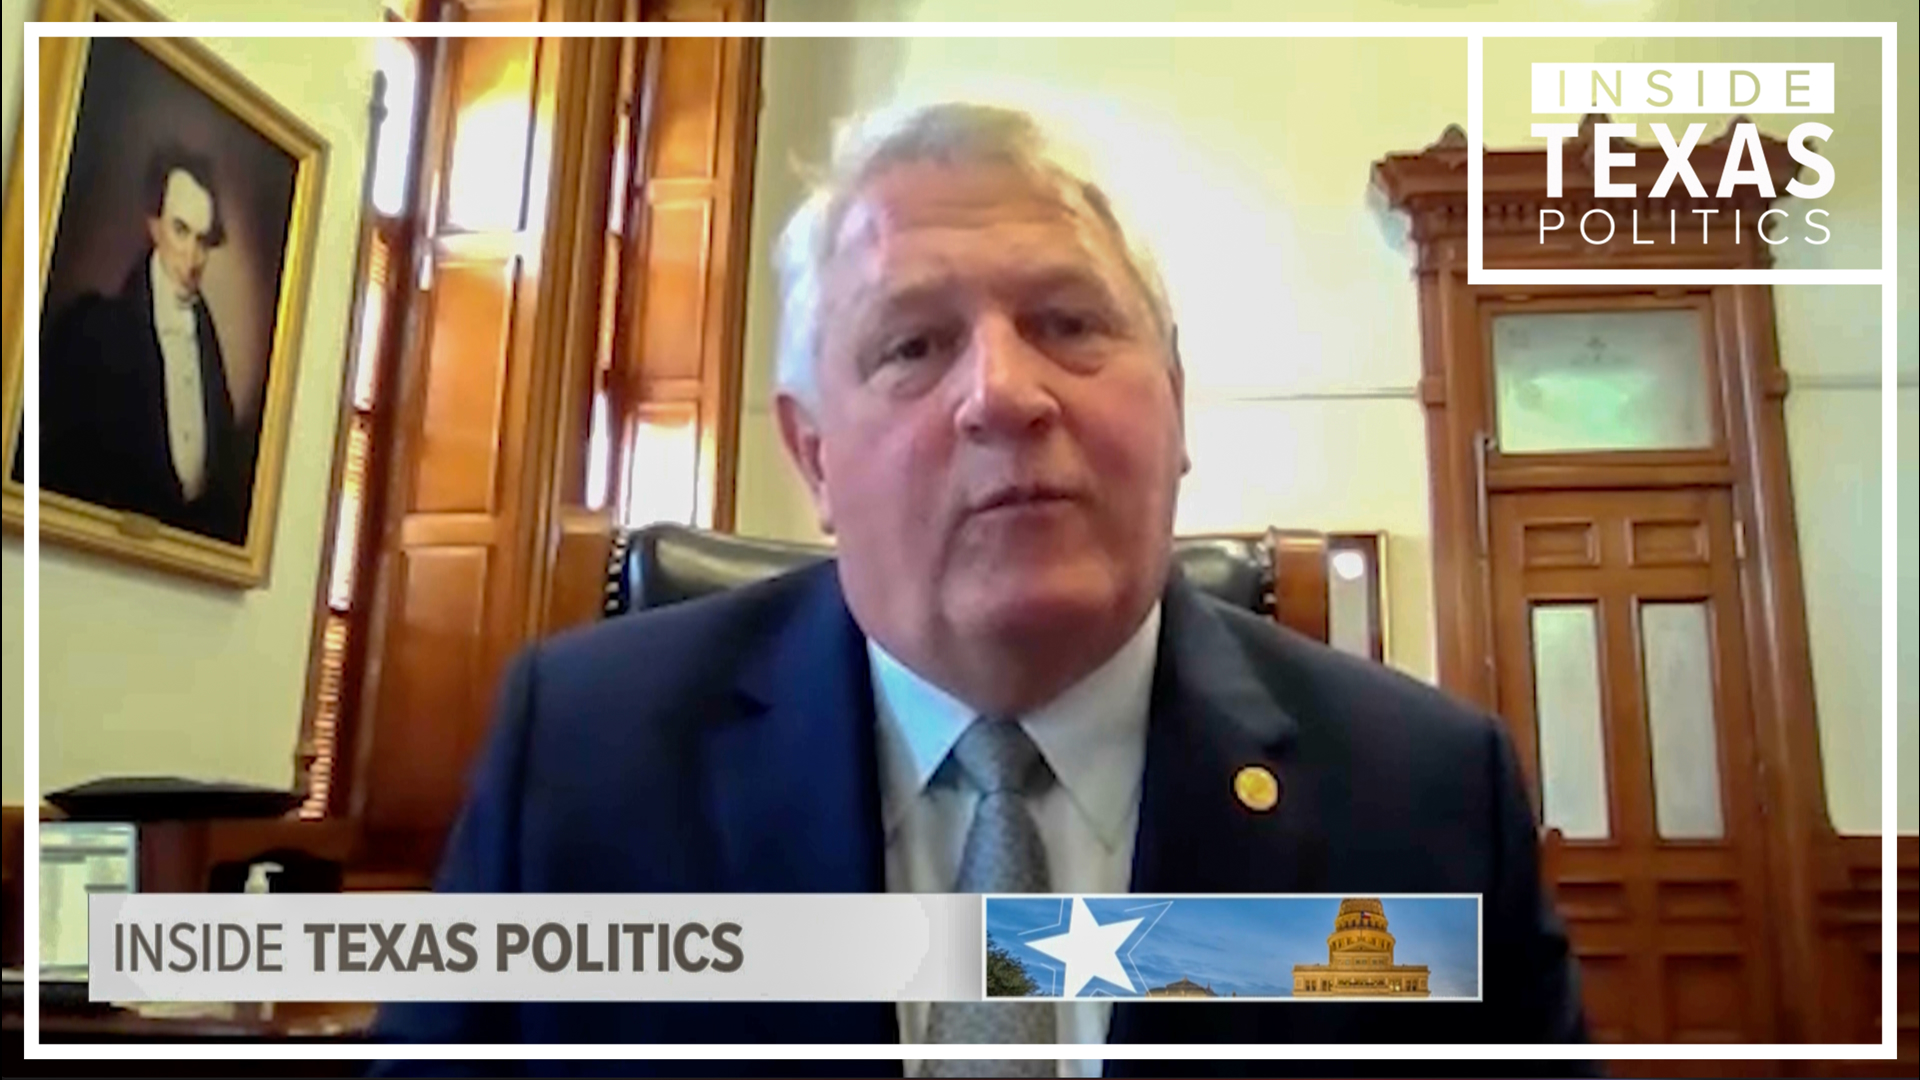 Midterm elections are right around the corner. What can we learn from early voting numbers? We break it down this week on Inside Texas Politics.